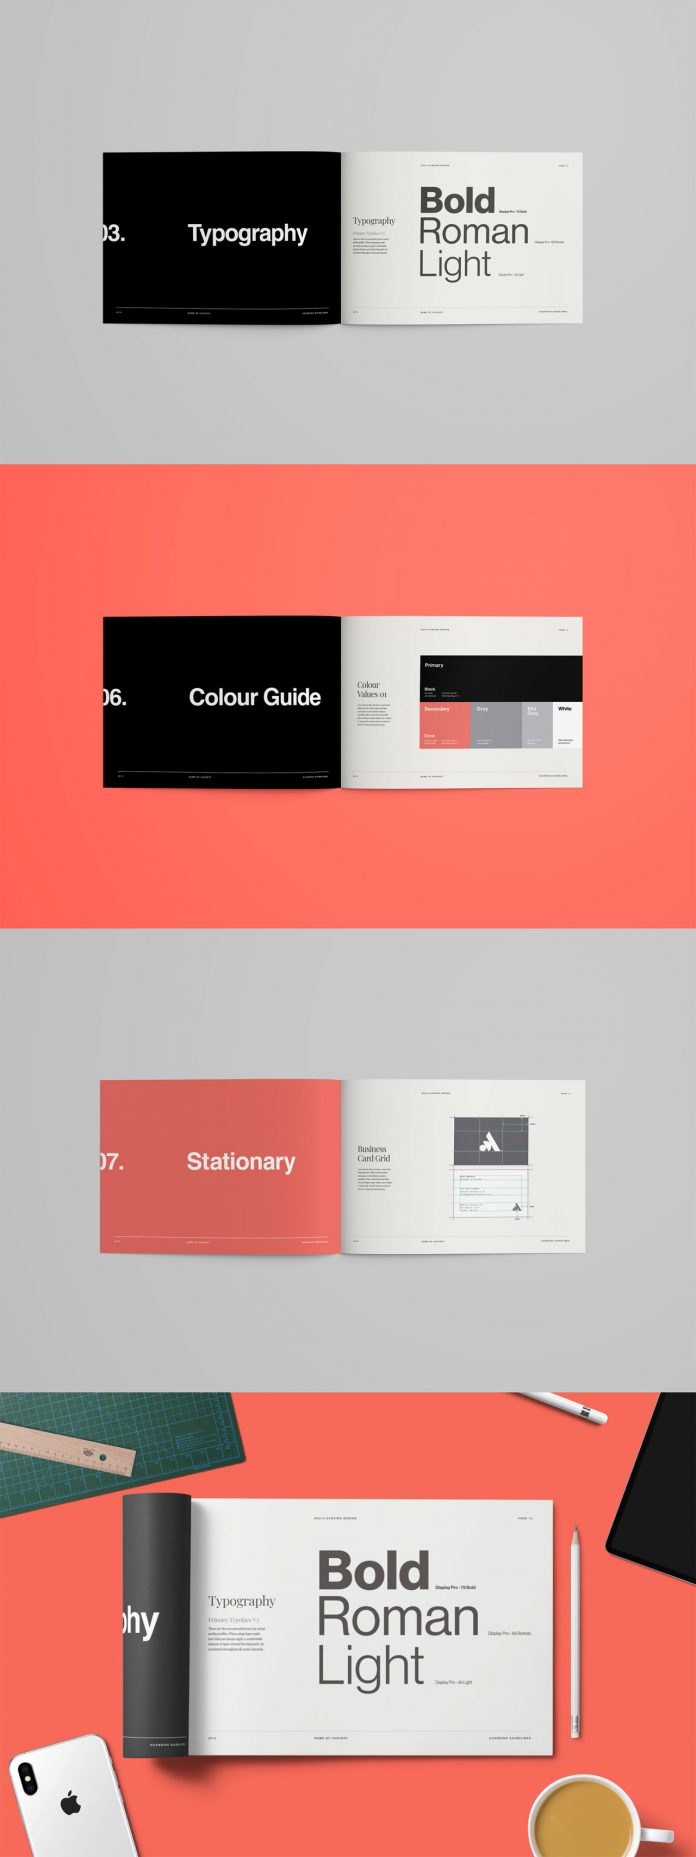 Minimal Brand Guidelines Template by Aperios Design.